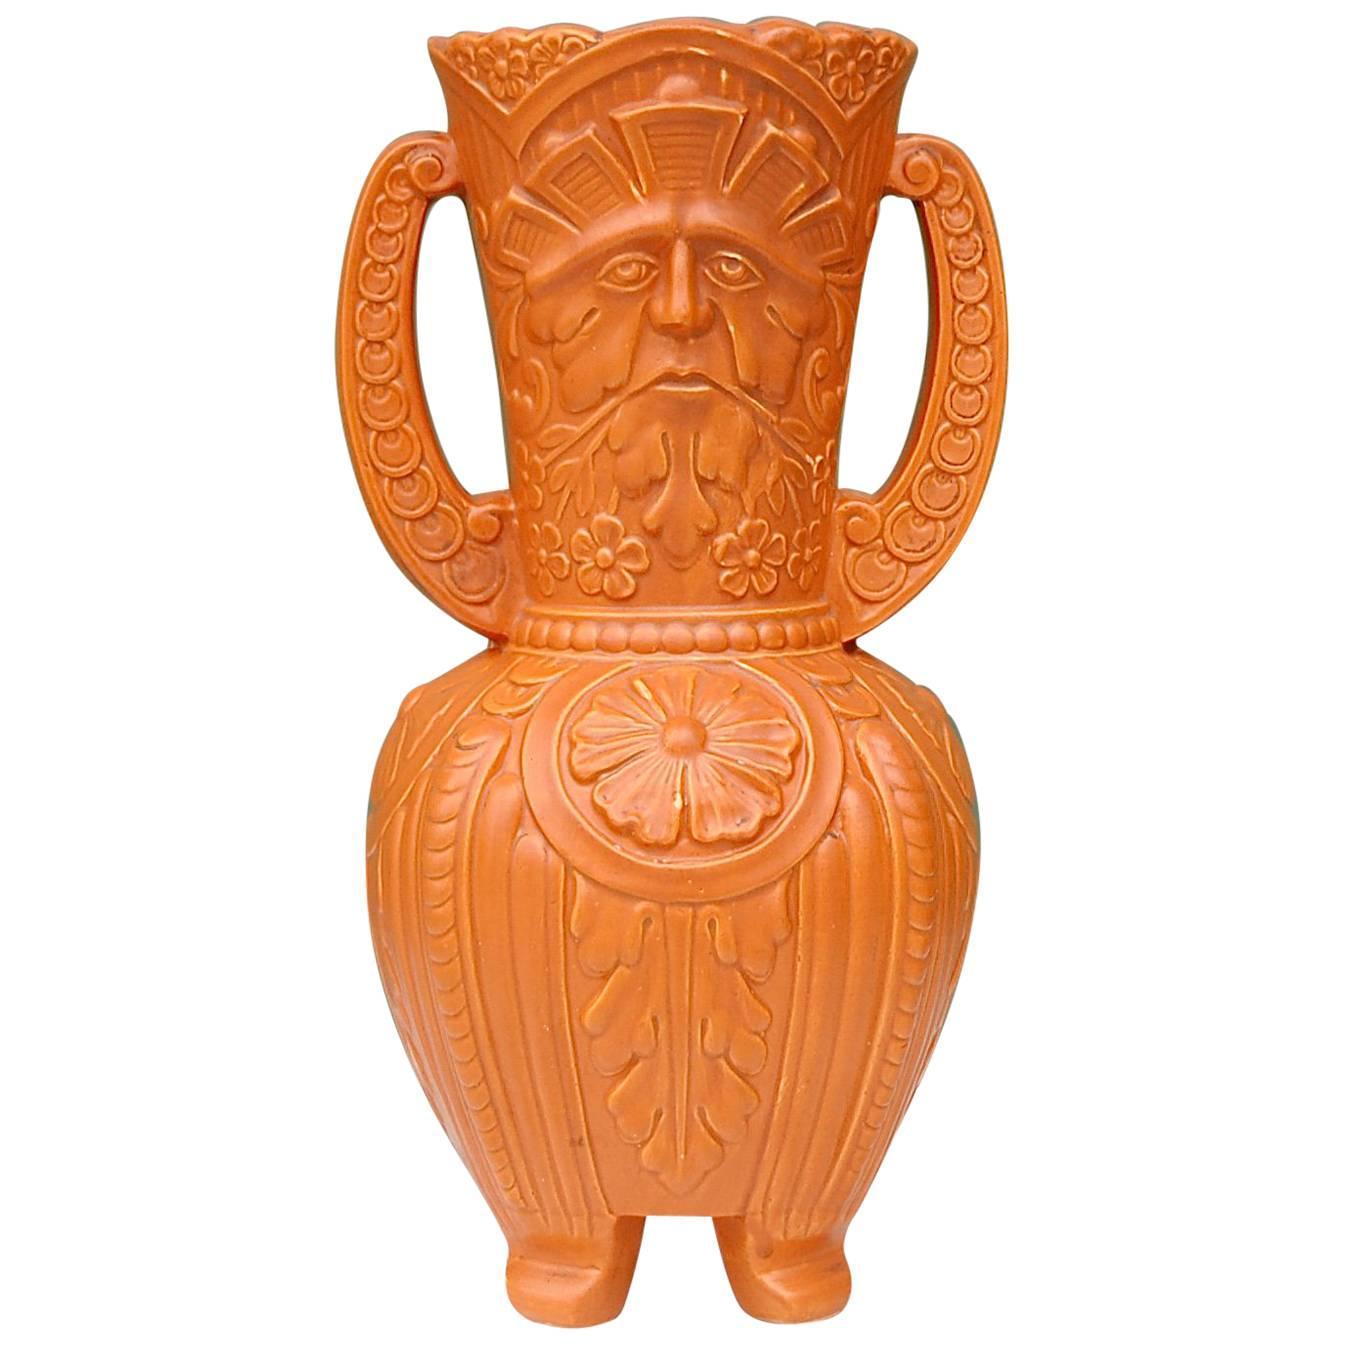 Ceramic Green Man Vase with Double Handle, Mid-20th Century For Sale